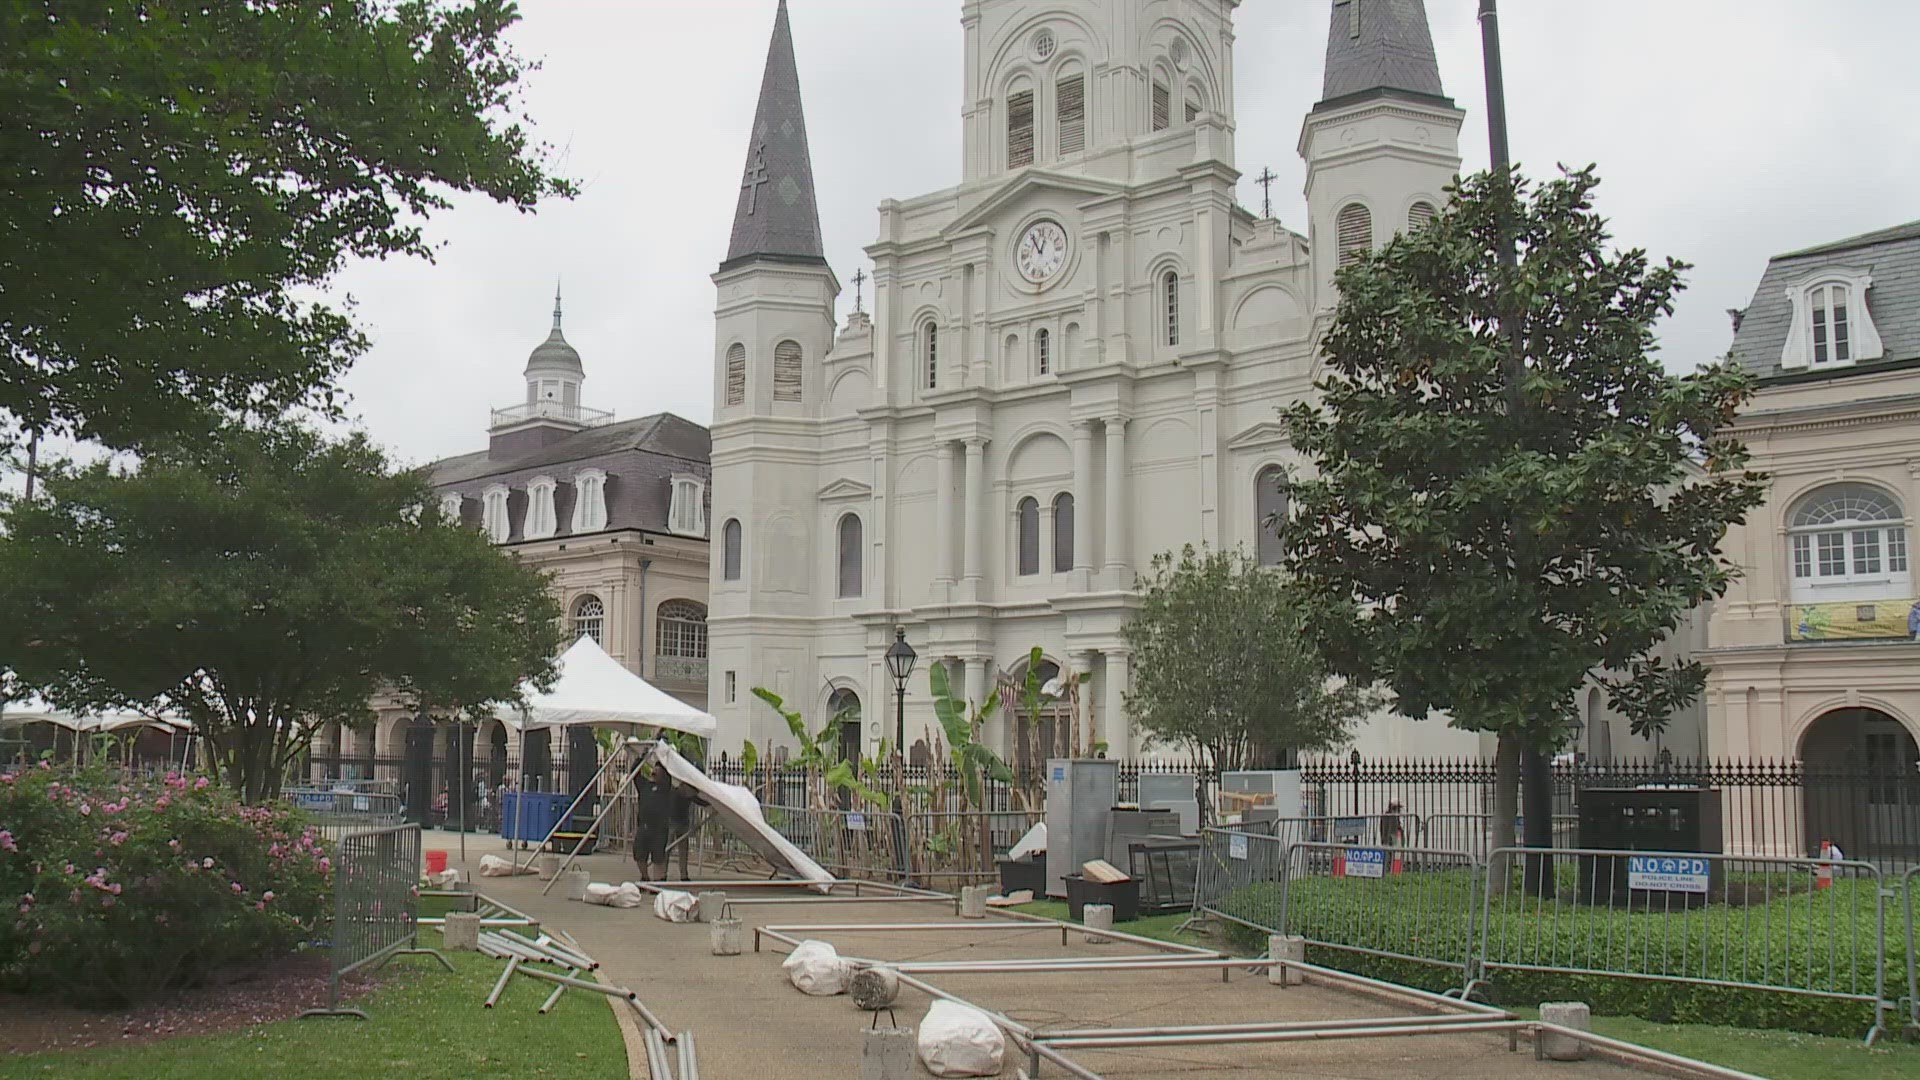 The French Quarter Festival is not taking any chances of losing booths and stages in the potential high winds.